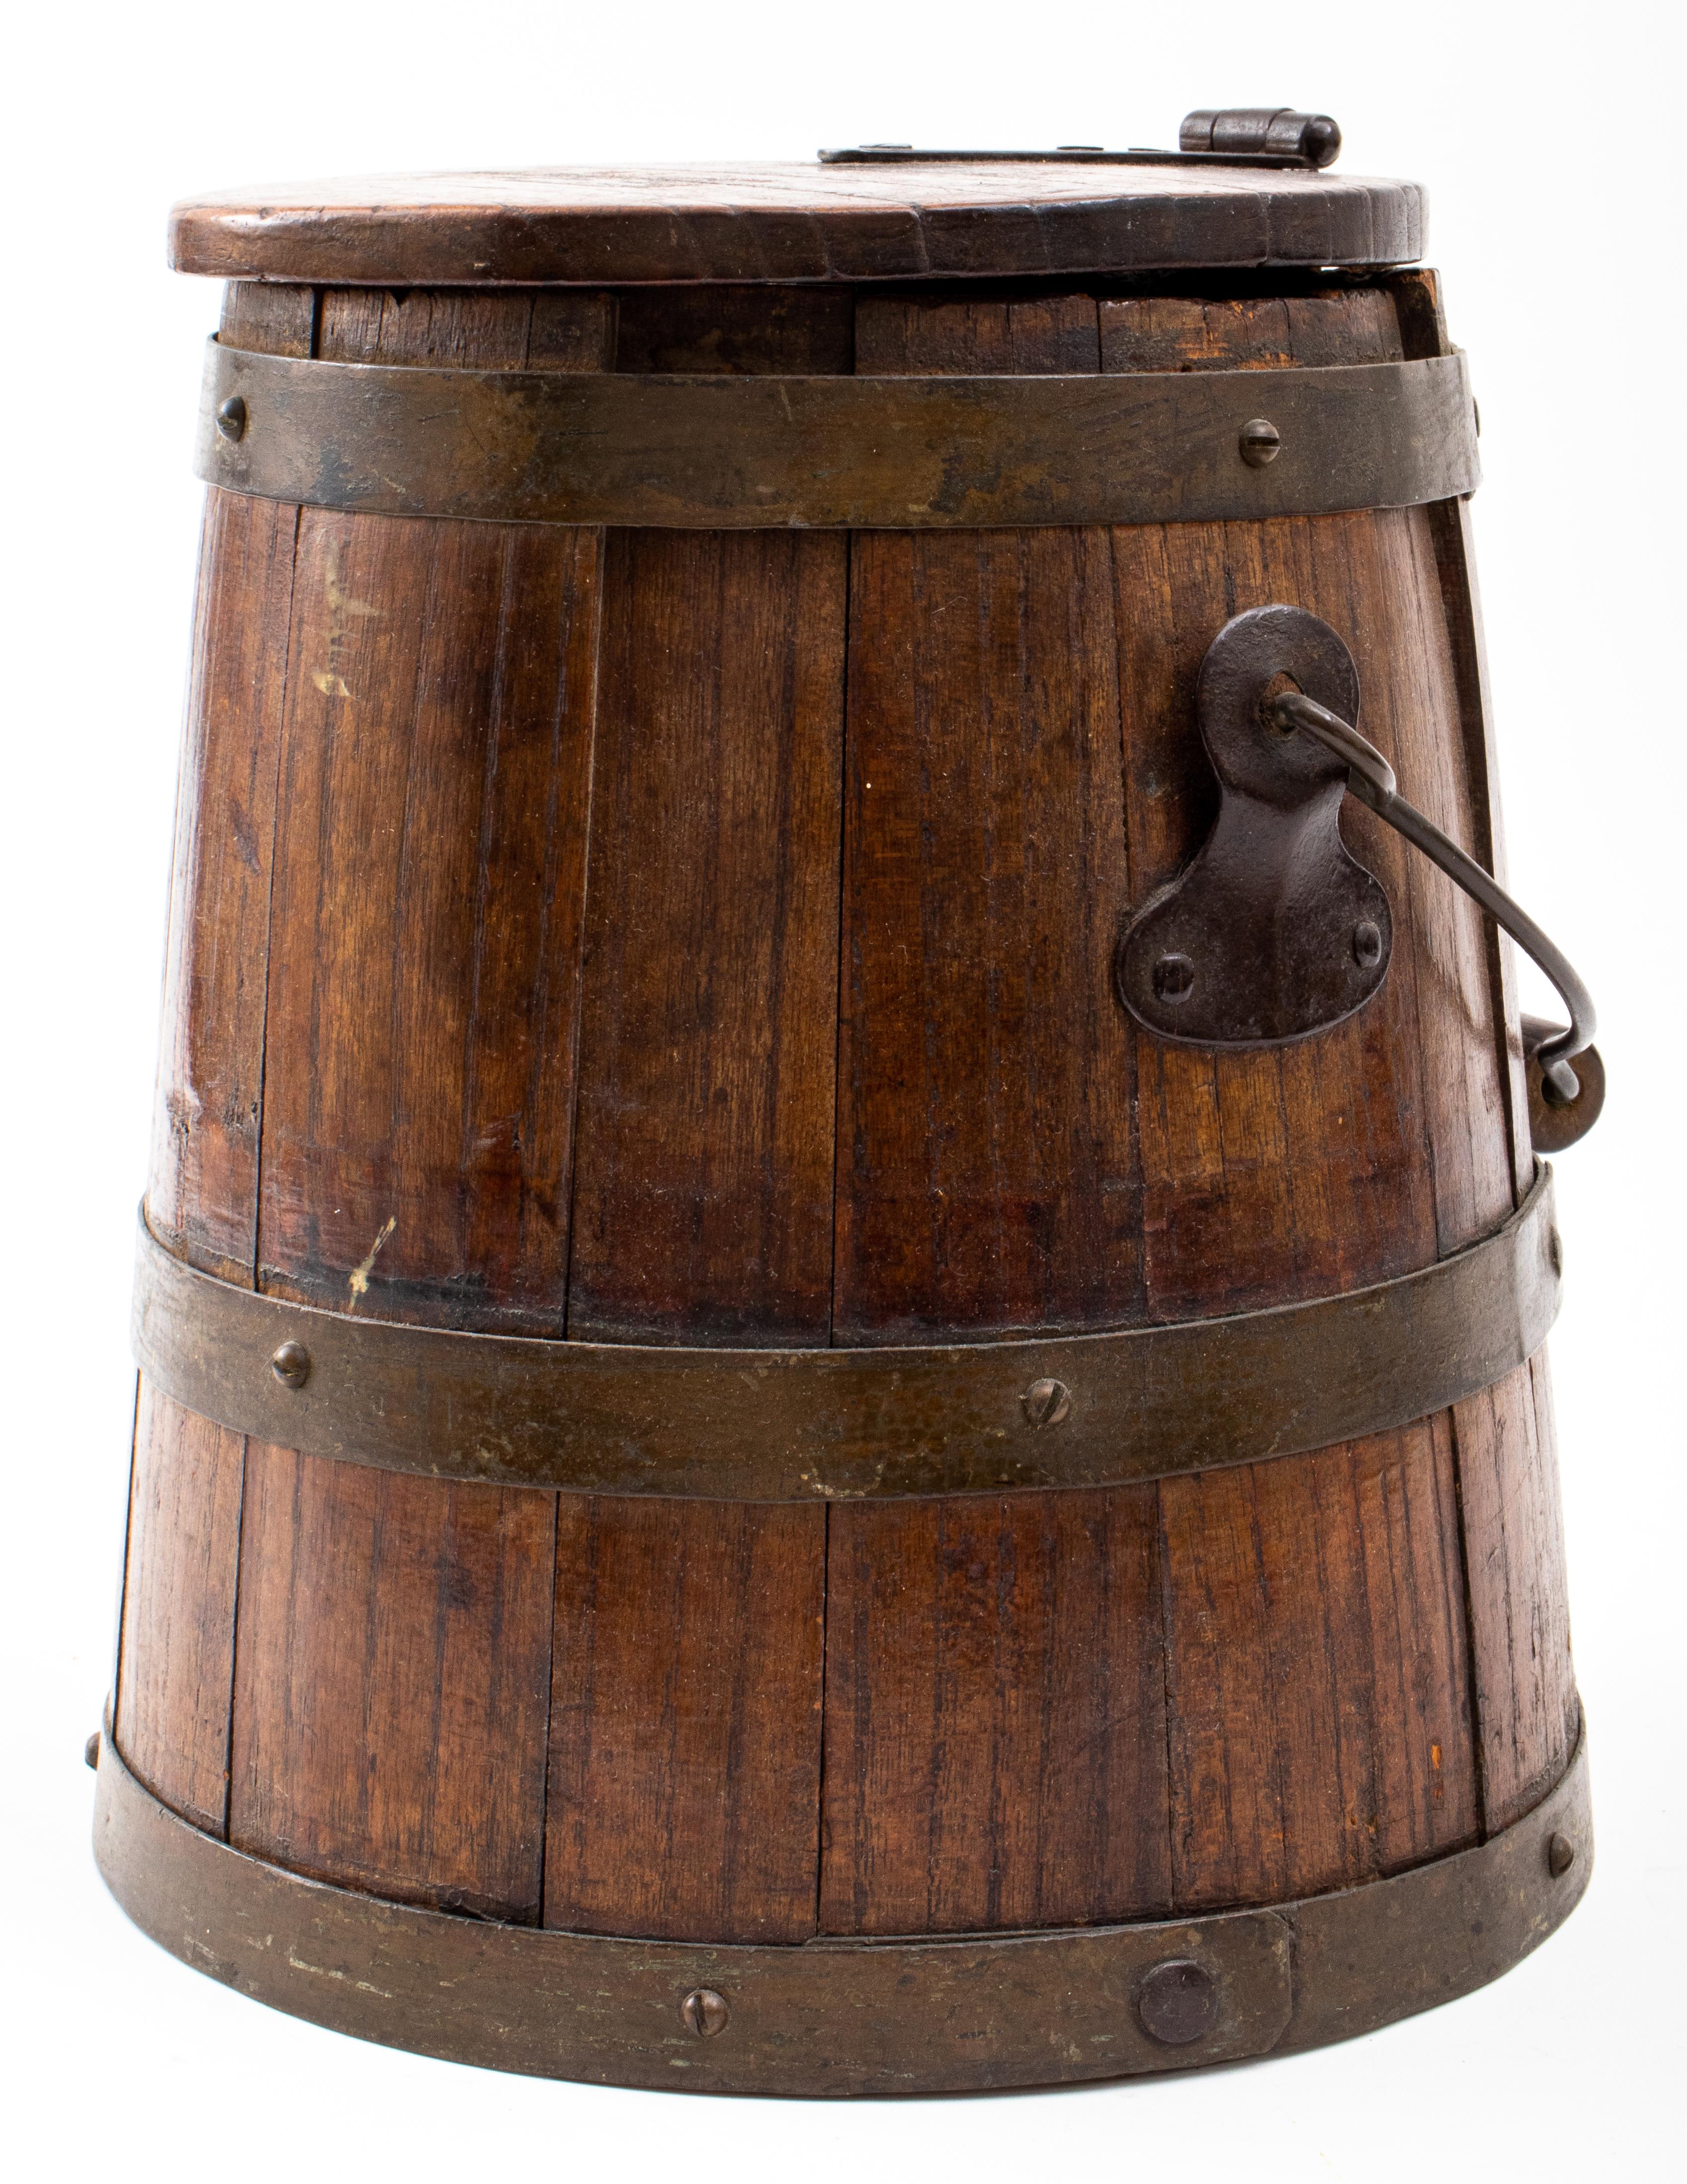 Victorian brass-bound oak milk pail of typical form with three brass straps, a shaped wire handle, and hinged lid. 
Measures: 10